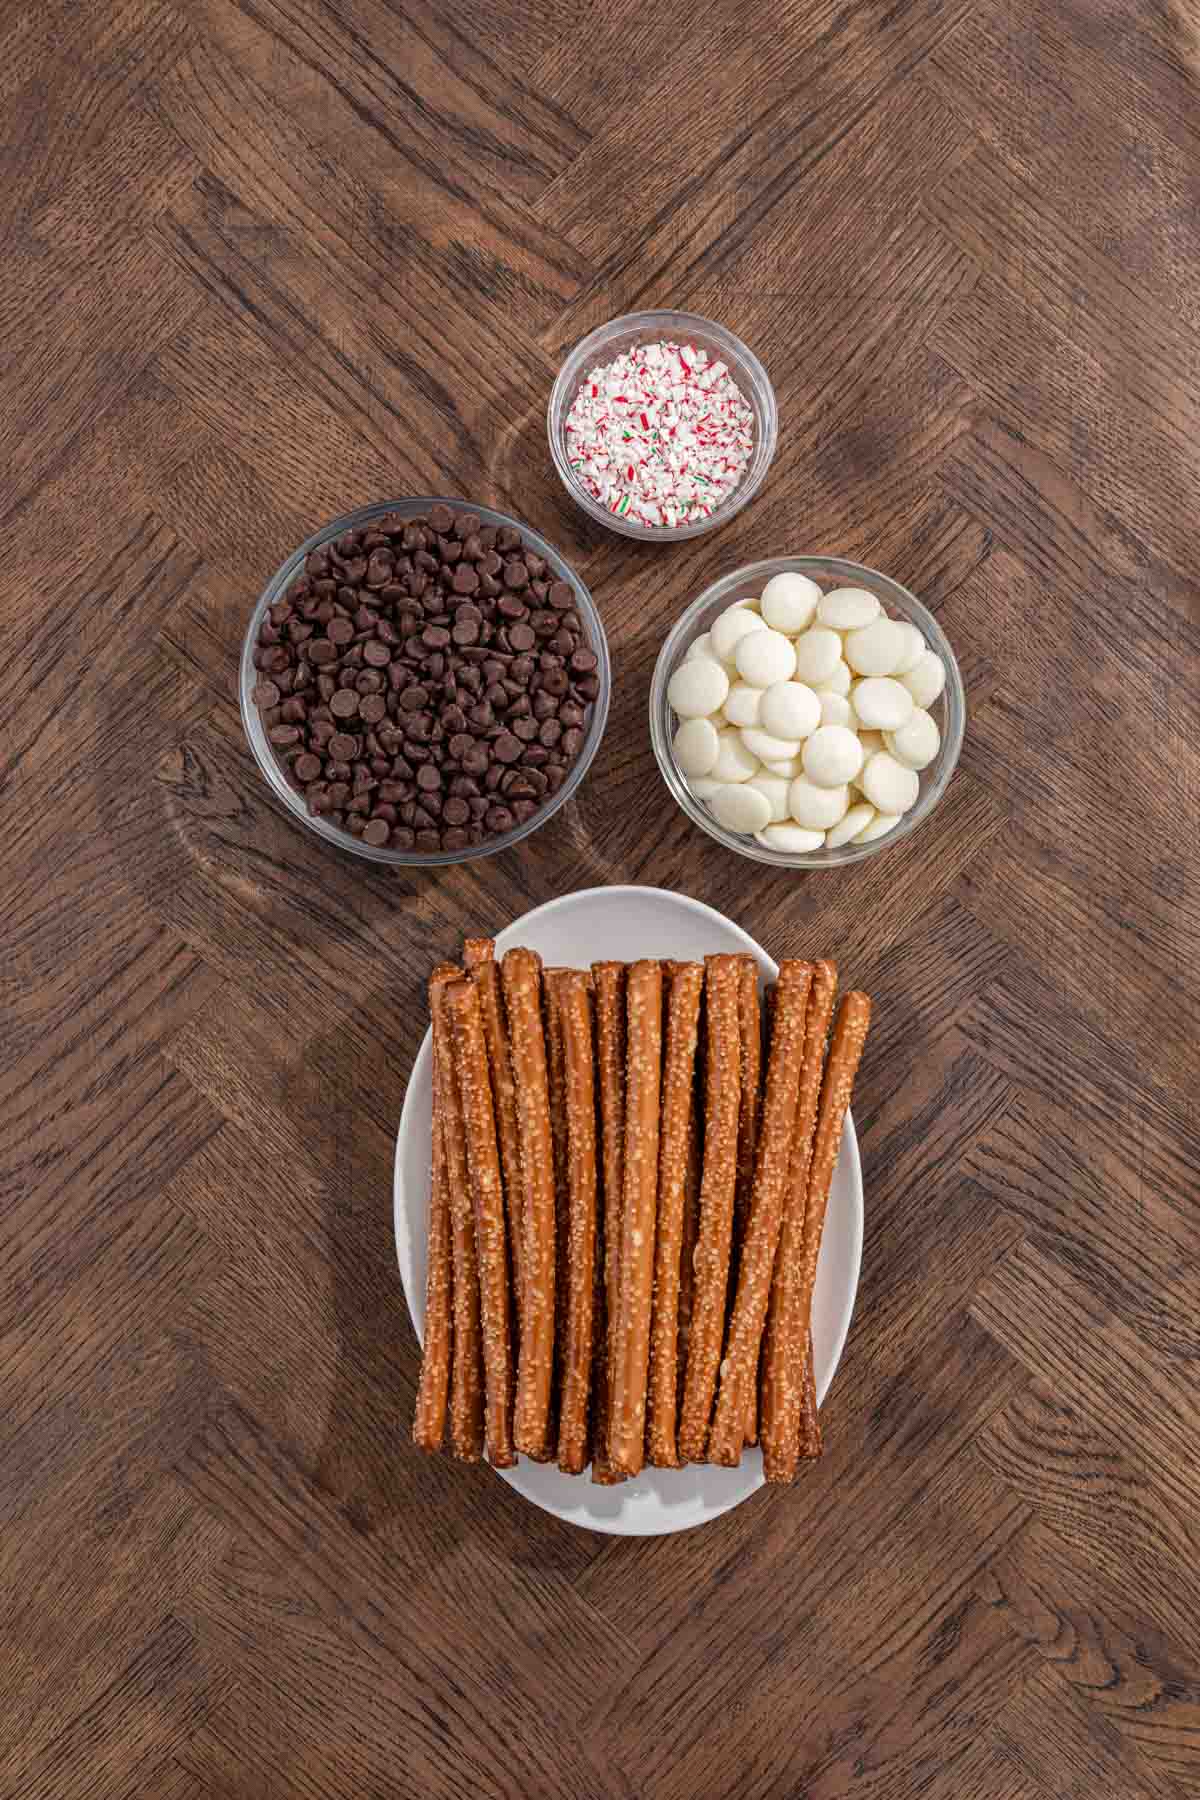 Peppermint Bark Pretzel ingredients separated in bowls and plate